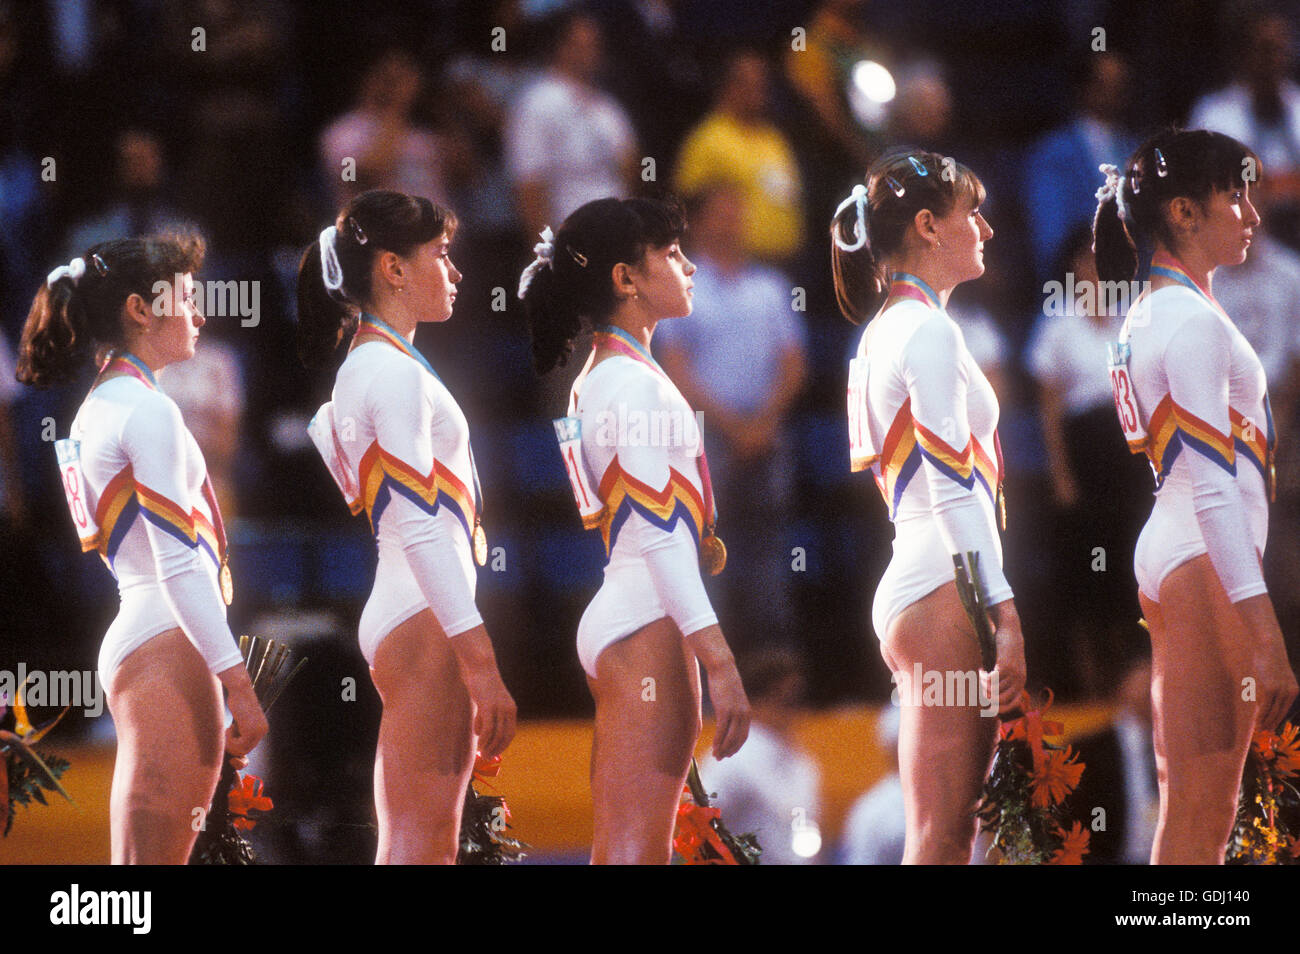 Romanian Gymnastics Team stands on victory stand with gold medals for winning team competition at 1984 Olympic Games in LA Stock Photo